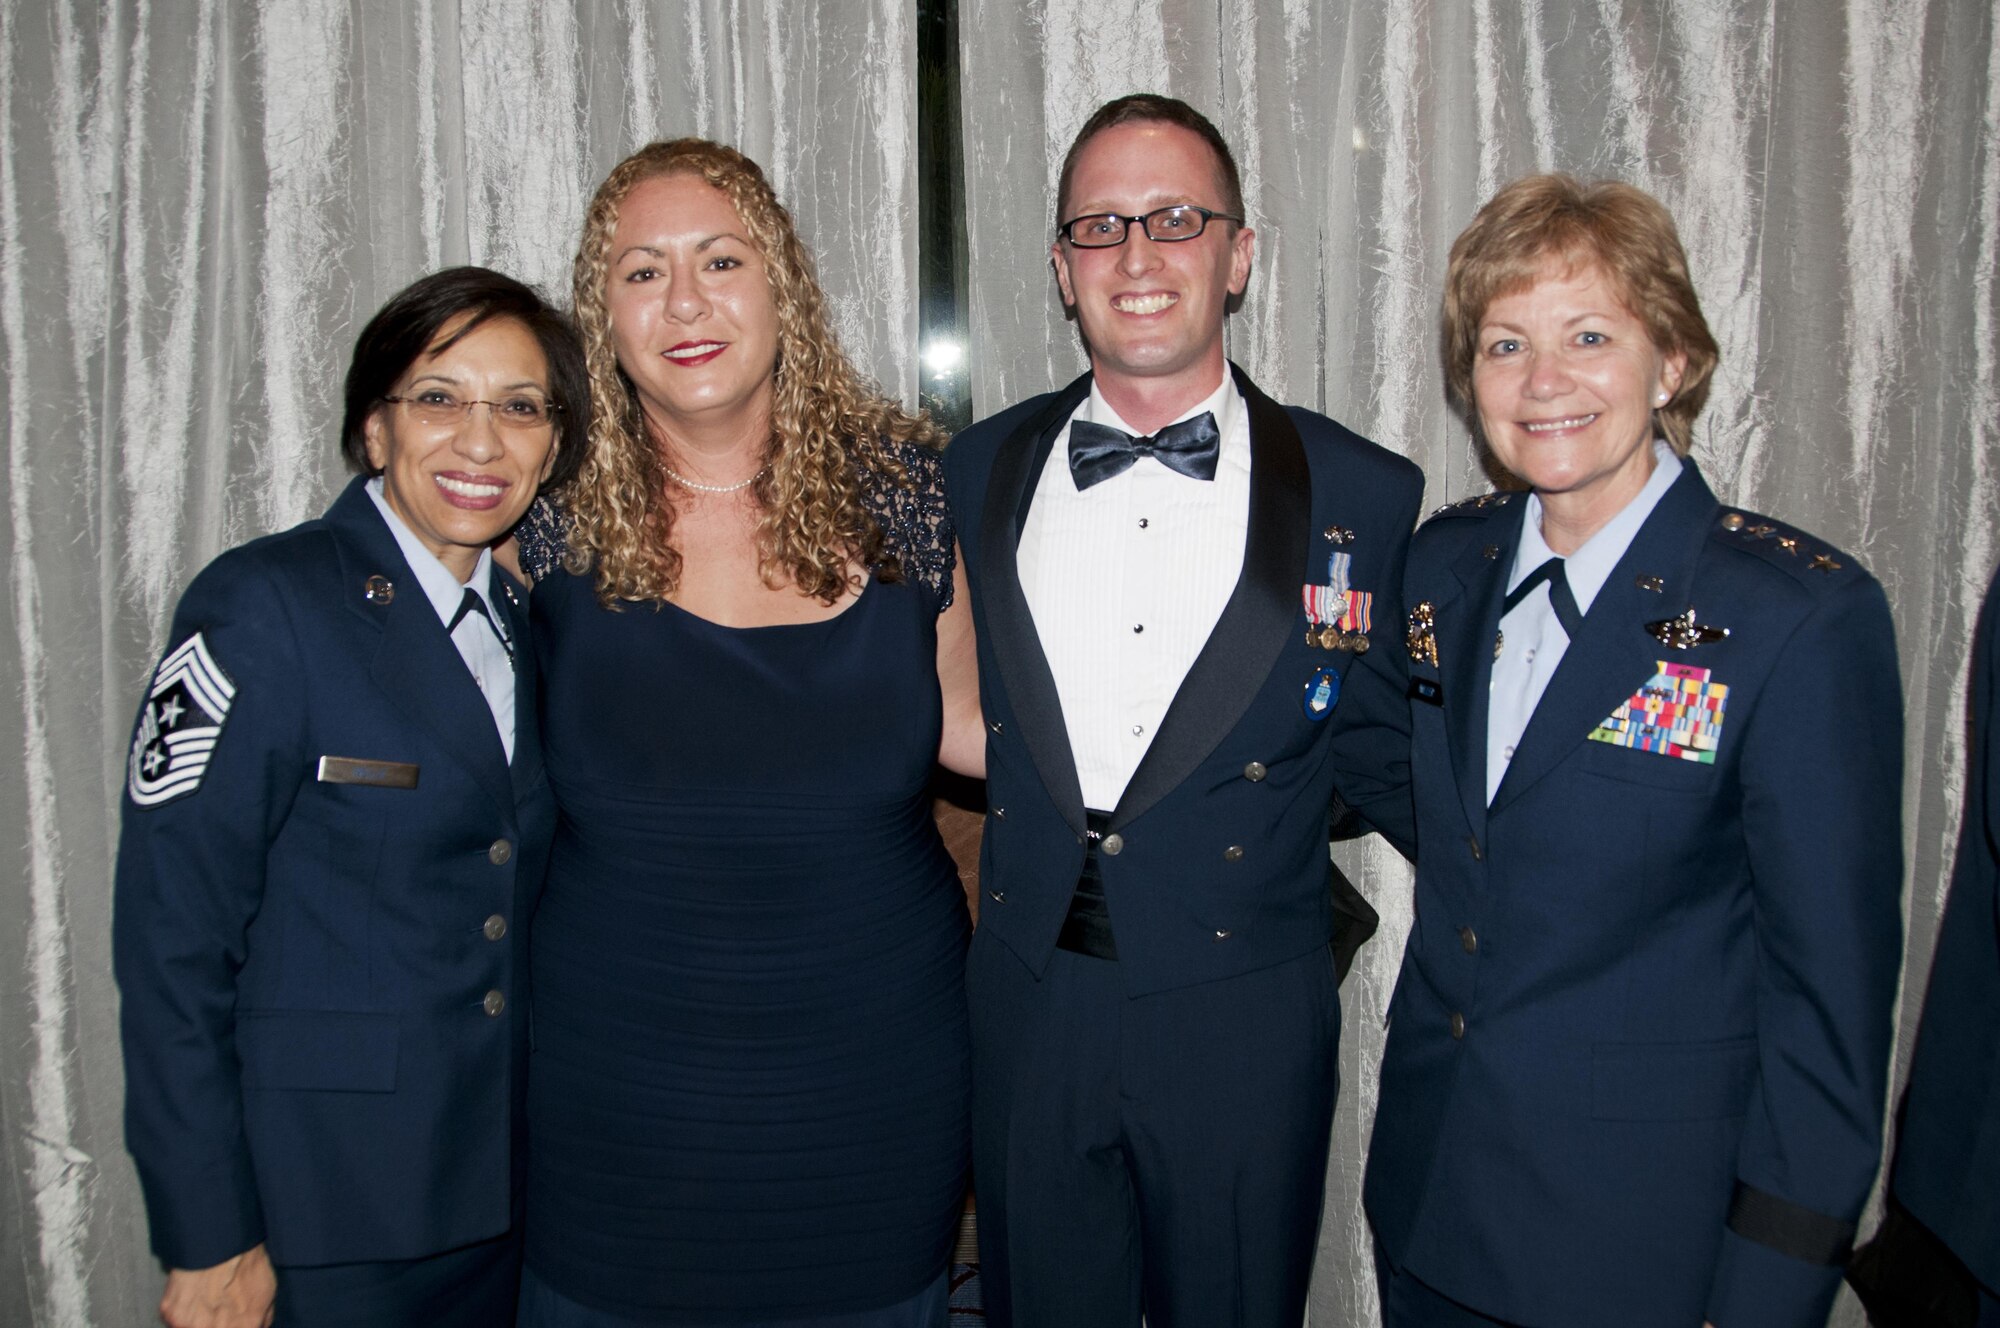 From left: Air Force Reserve Command Chief Master Sgt. Ericka Kelly, Mrs. Natalie Tolber, Staff Sgt. Aaron Tobler, Lt. Gen. Maryanne Miller, chief of the Air Force Reserve and commander, Air Force Reserve Command, during the Air Force Association recognition banquet for the 12 Outstanding Airmen of  the Year Sept. 19, 2016. Tobler is a geospatial intelligence analyst with the 50th Intelligence Squadron, Beale Air Force Base, California.